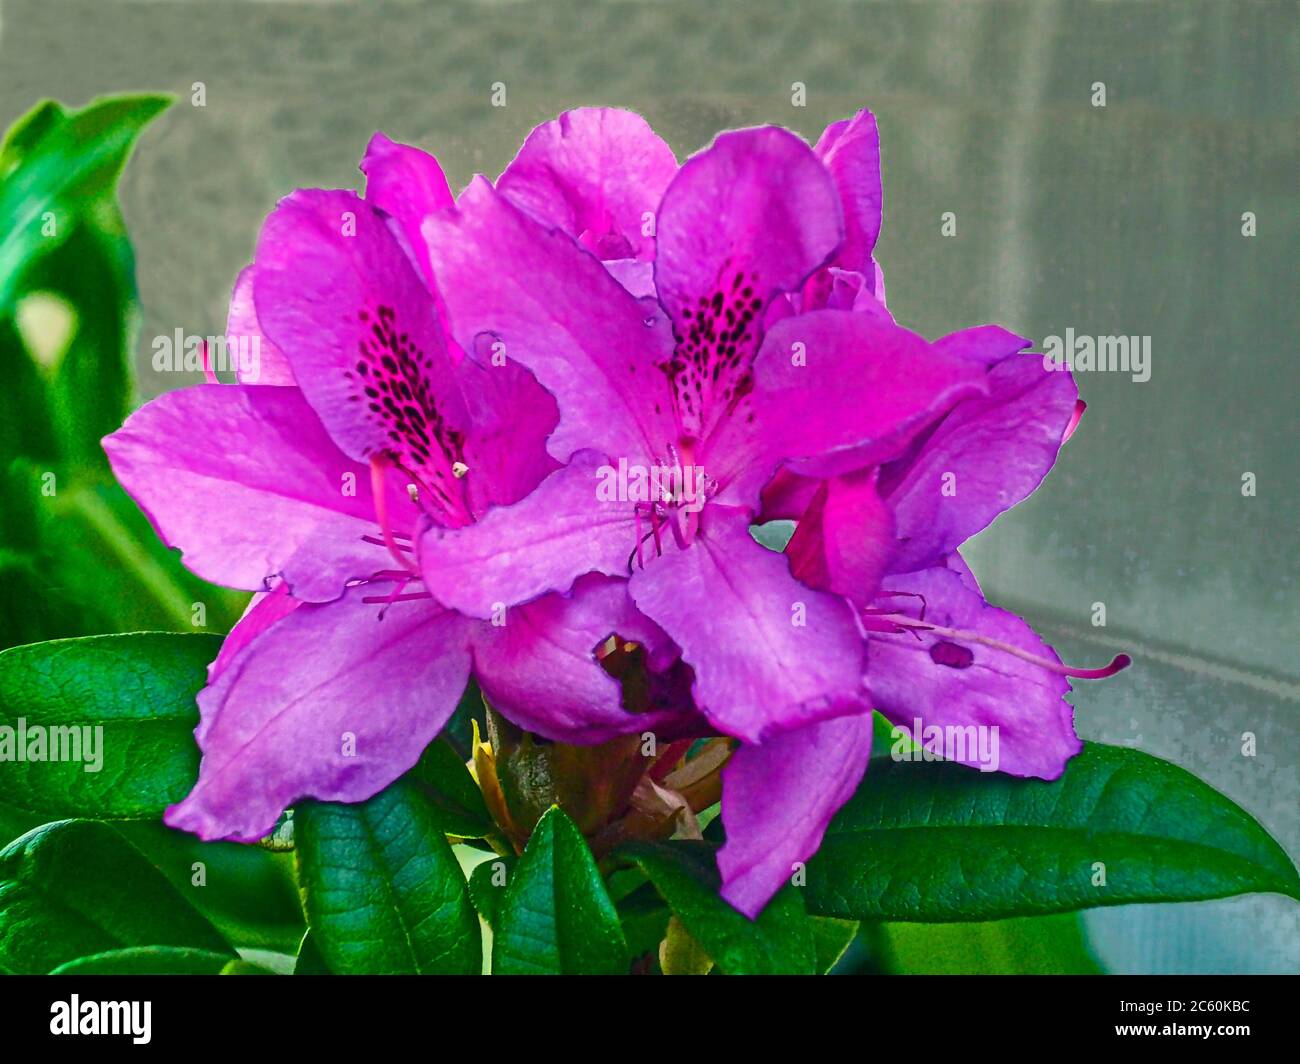 Rhododendron flower (Ericaceae). Stock Photo